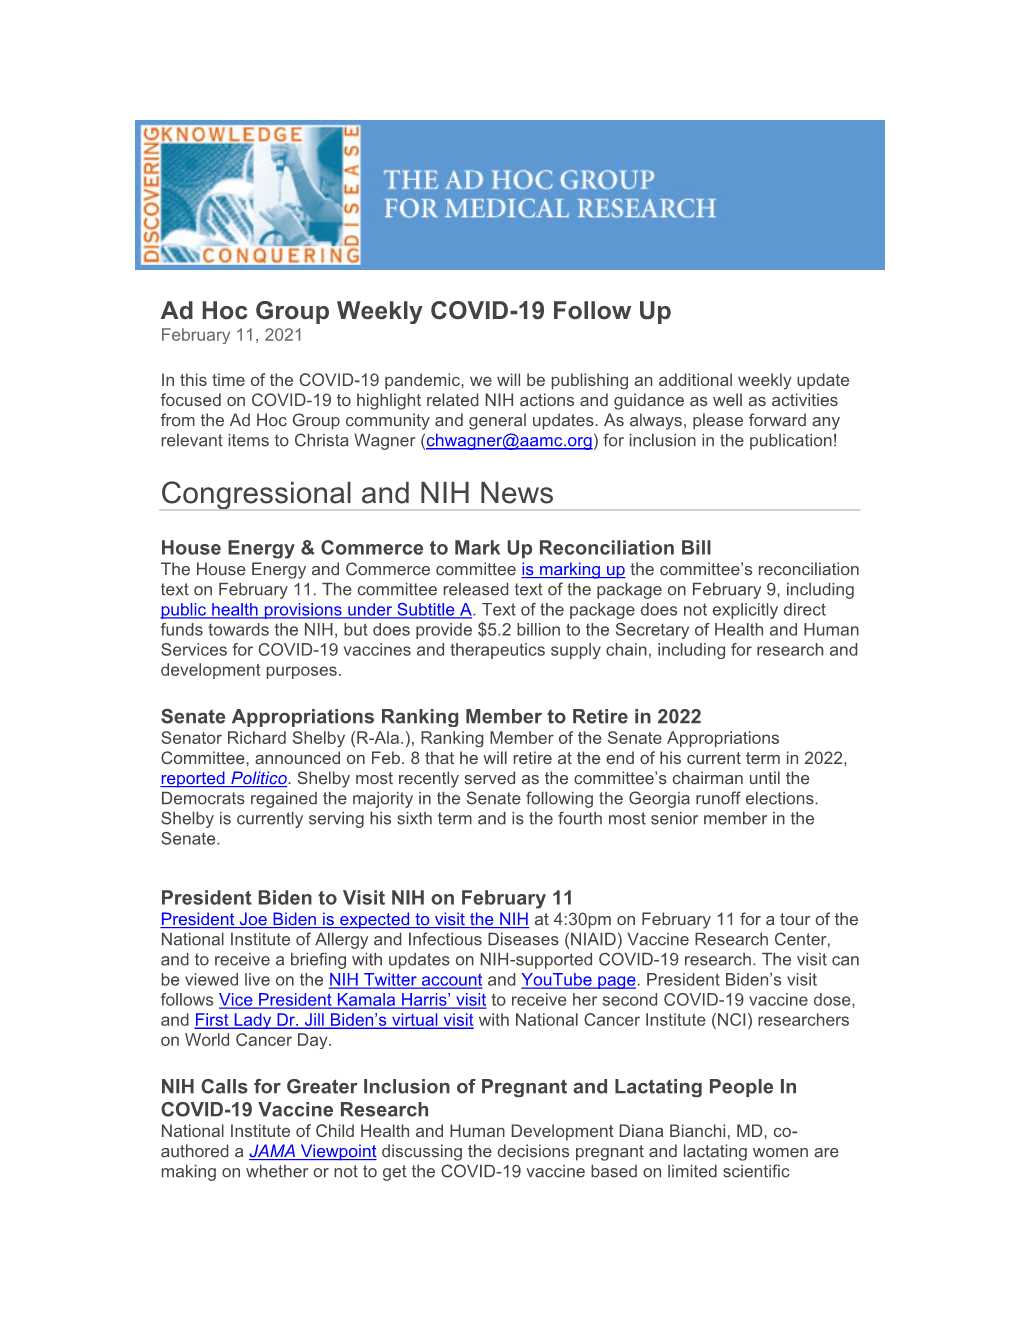 Congressional and NIH News